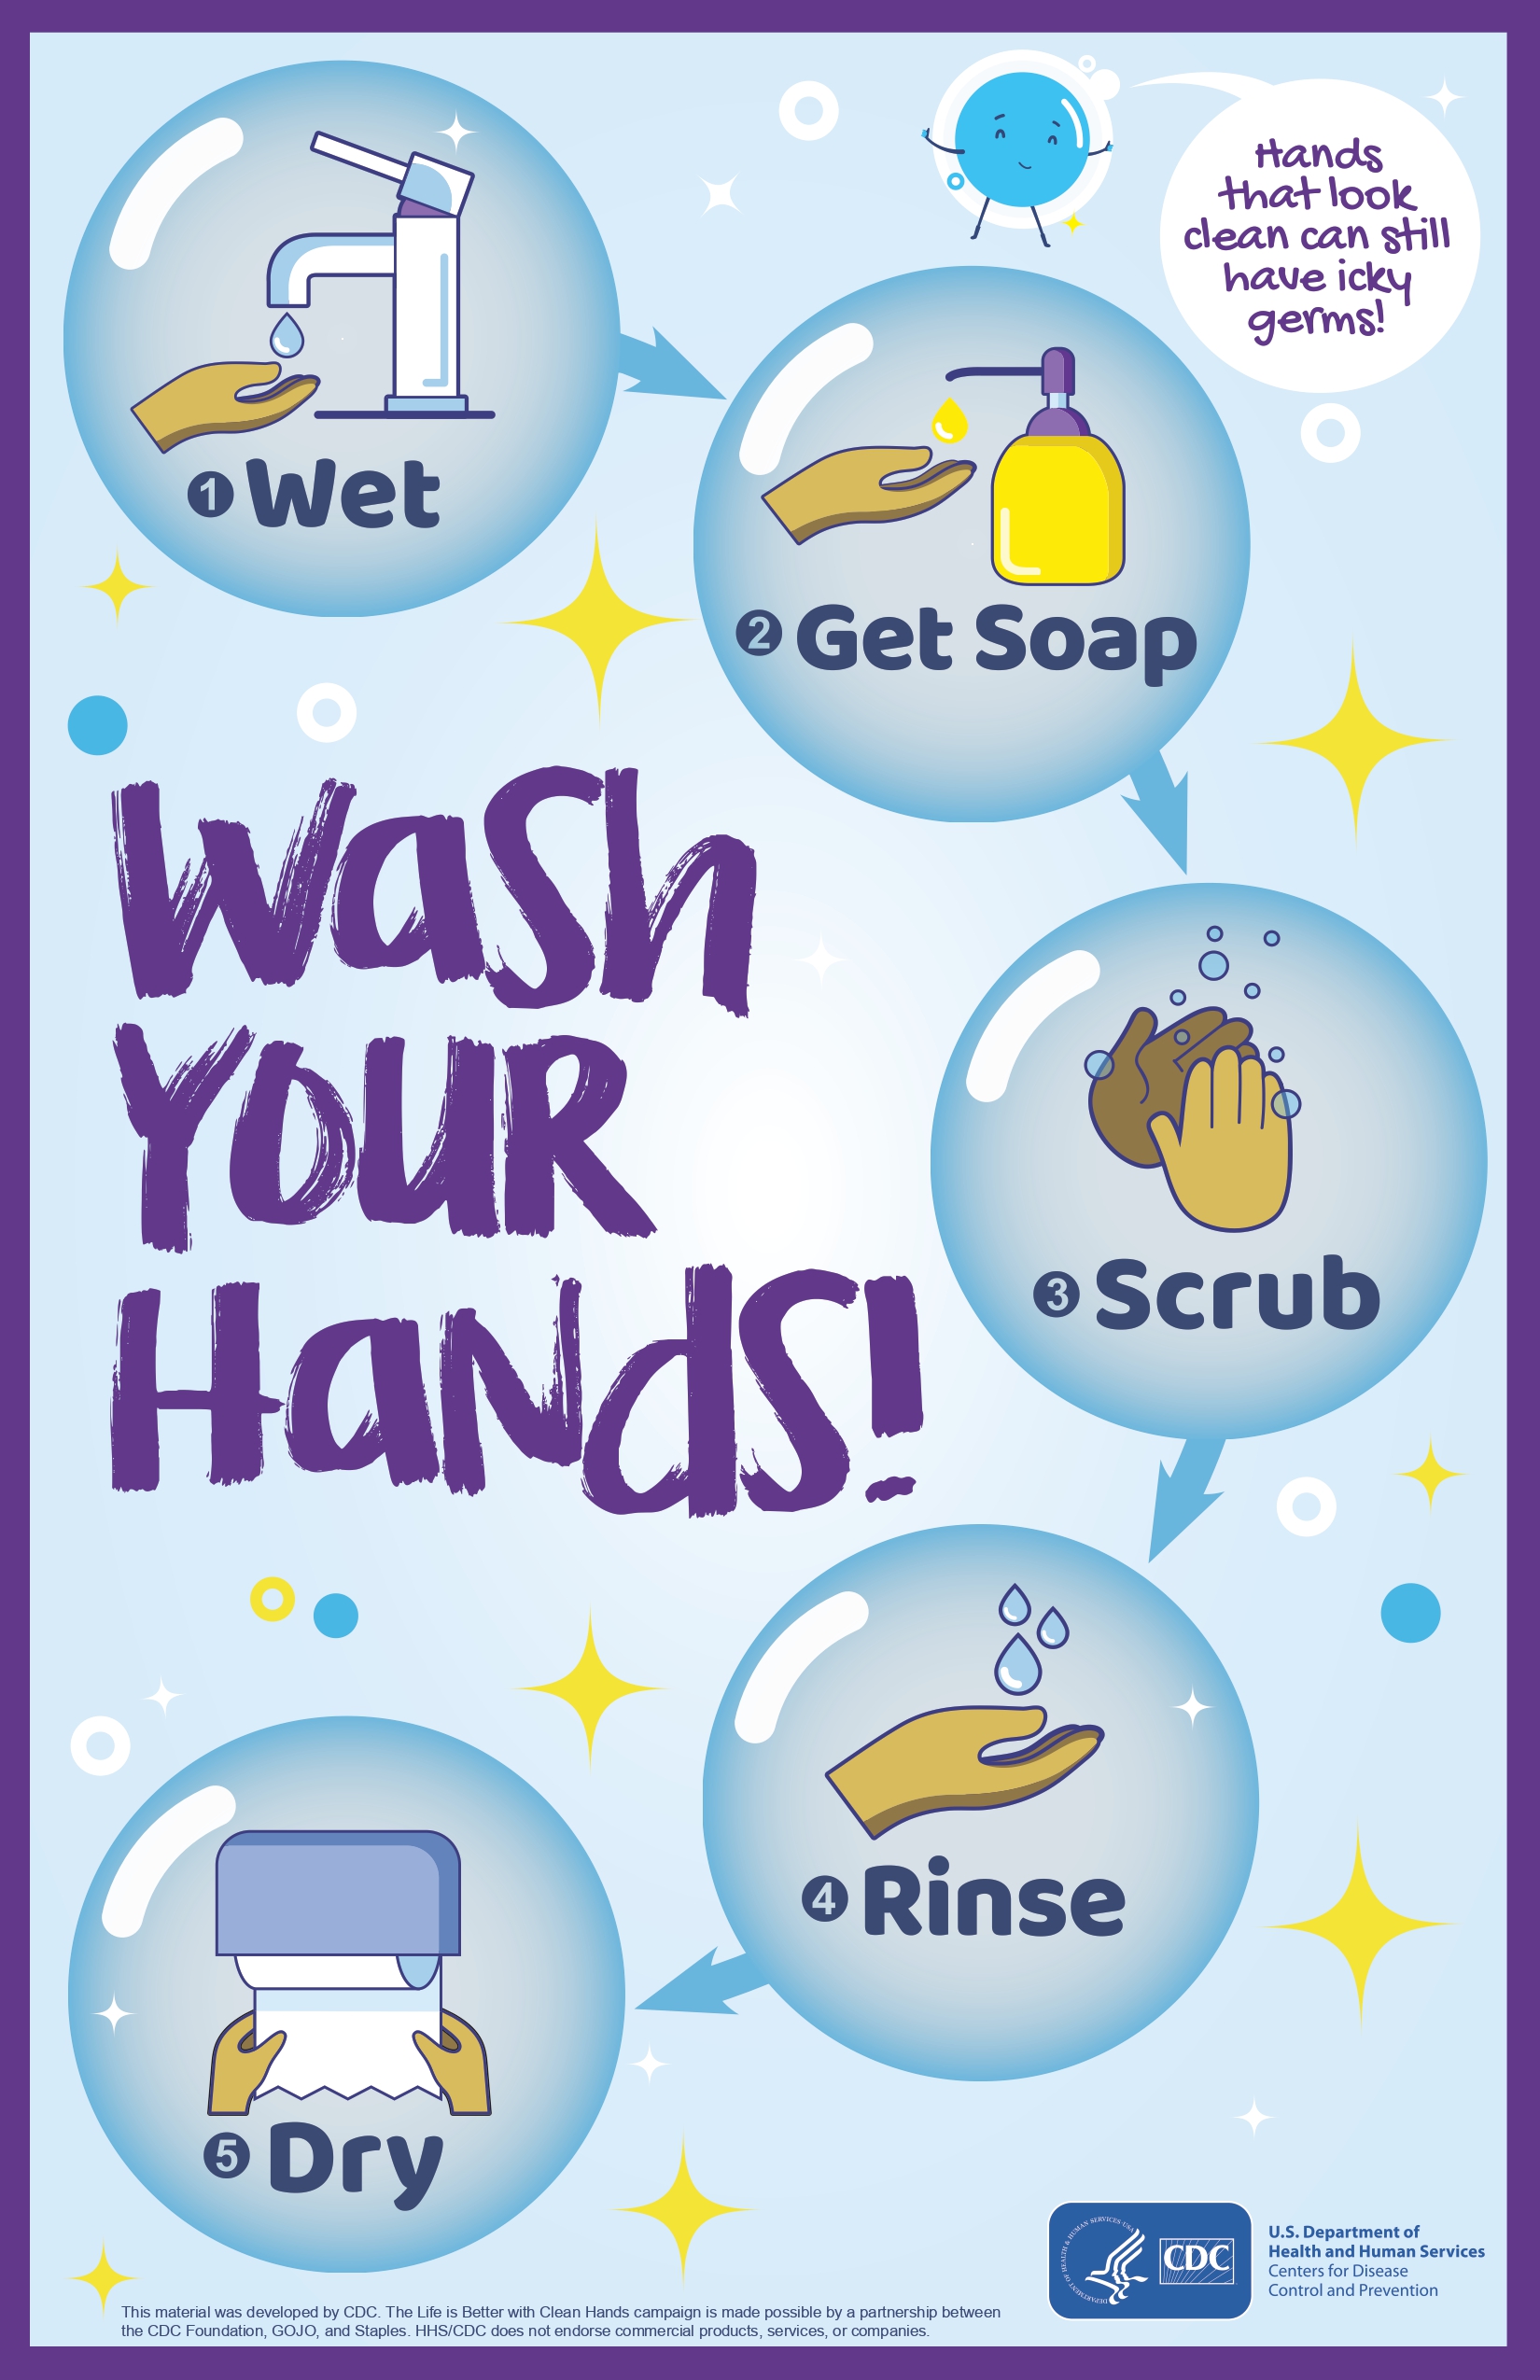 cdc-wash-your-hands